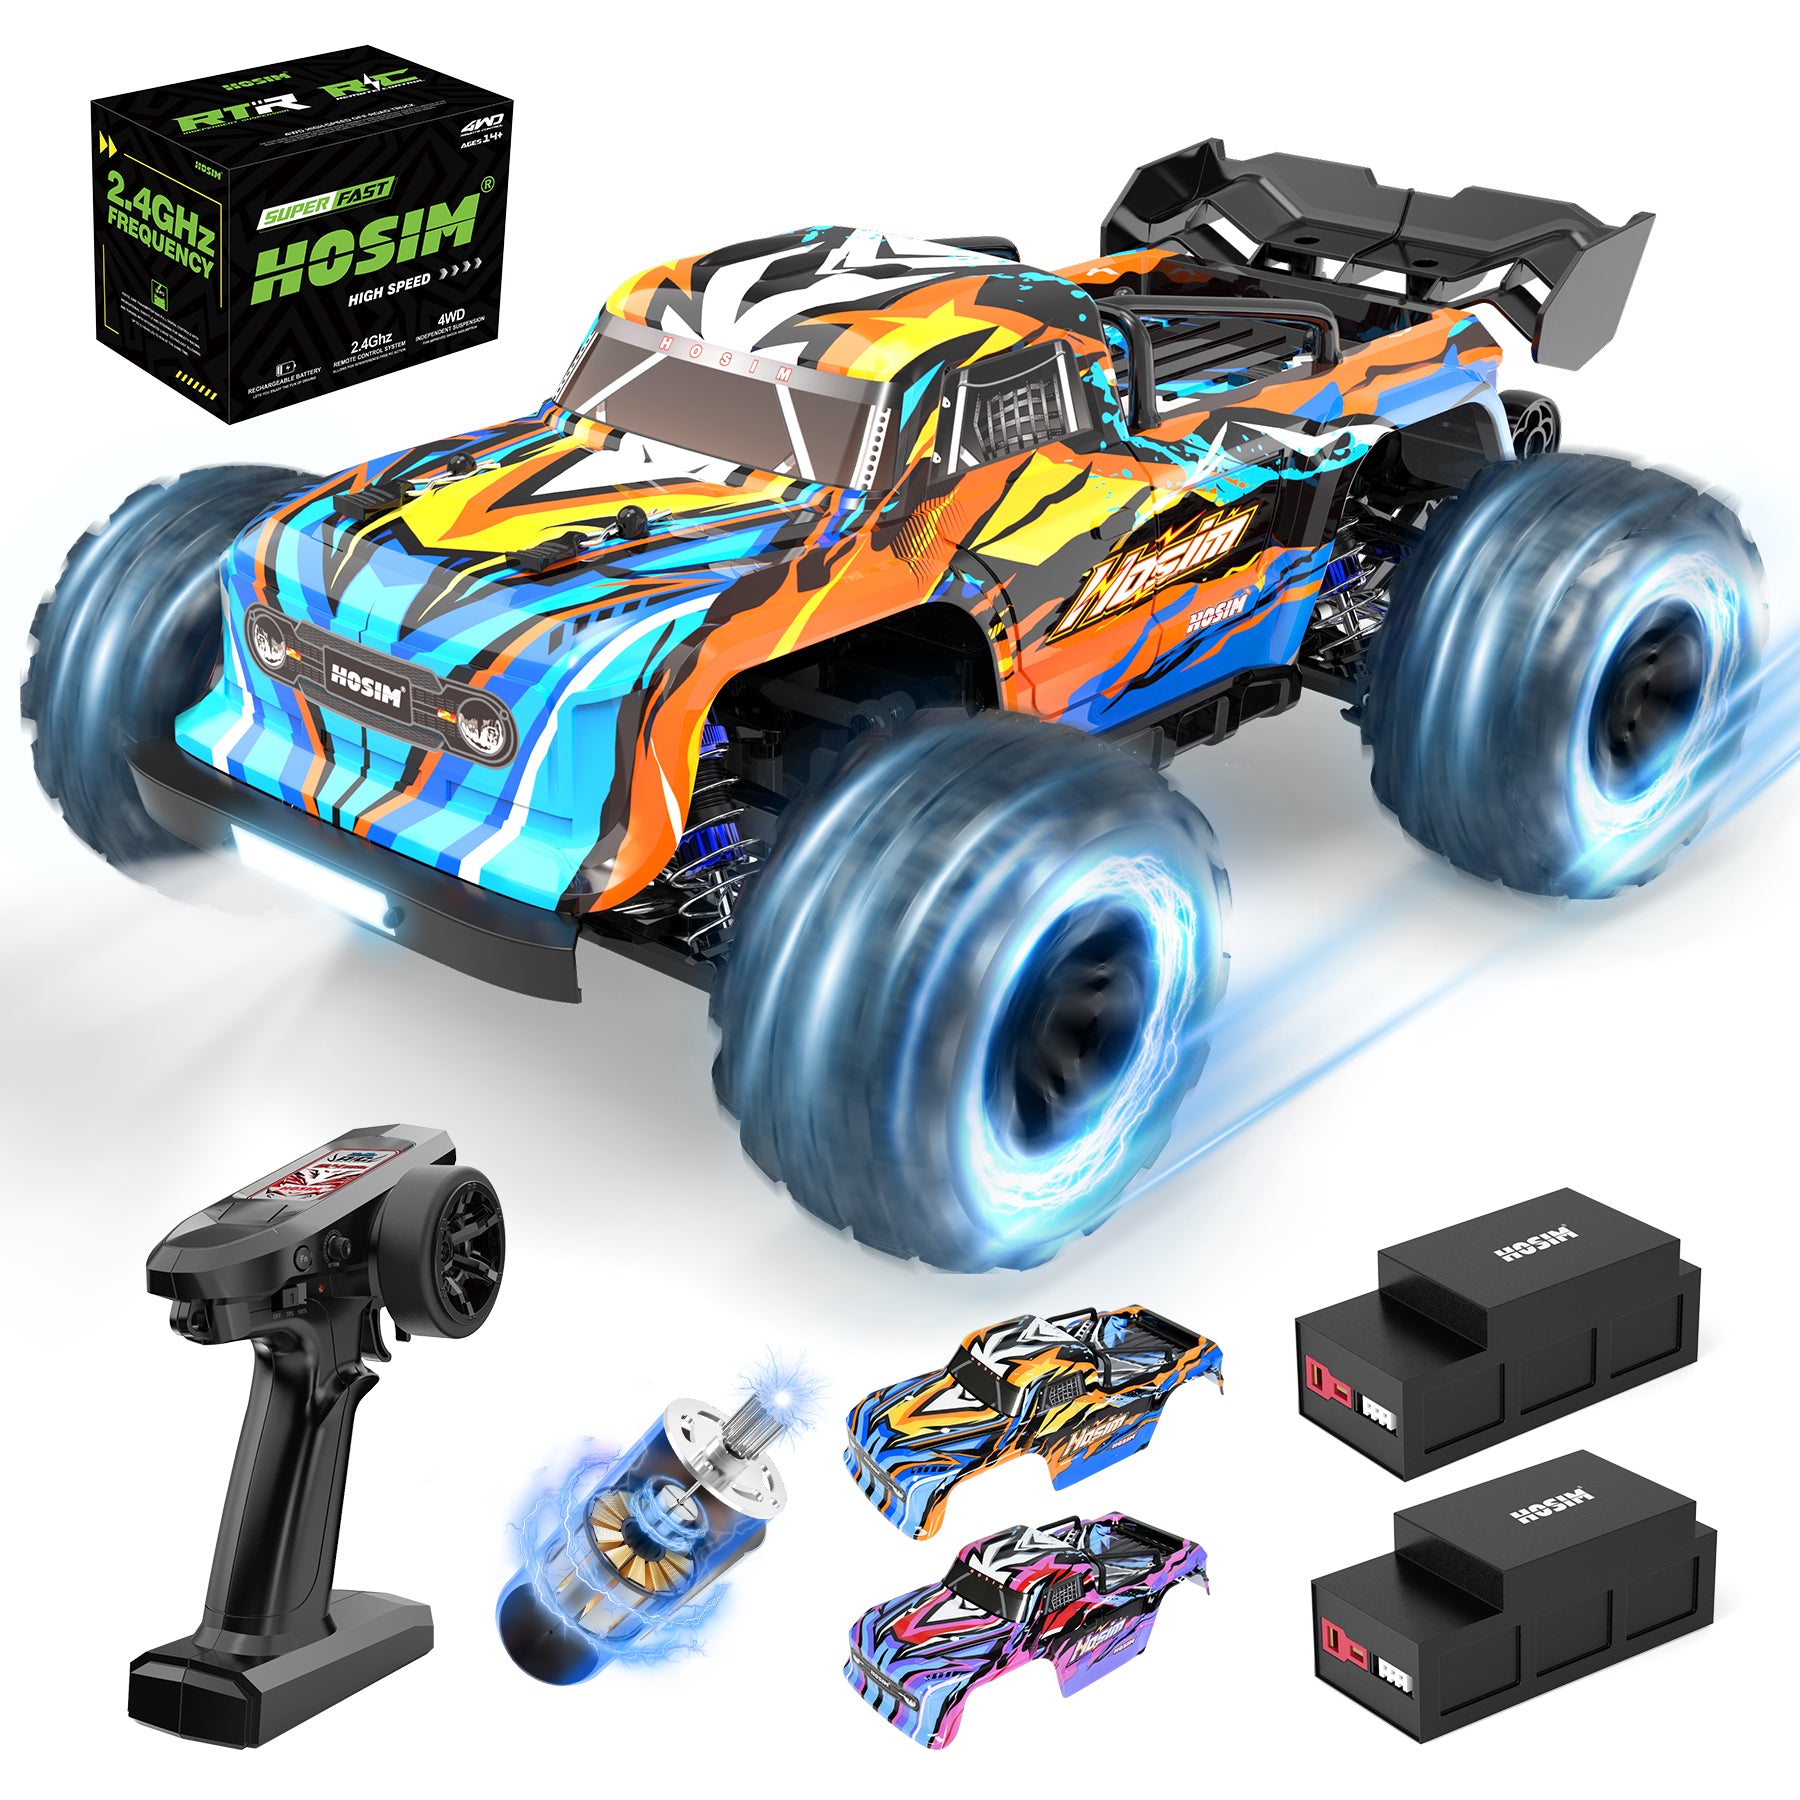 Hosim 1:16 Scale 40+KPH All Terrain RC Car,4WD Waterproof High Speed Electric Toy Off Road RC Monster Truck Vehicle Crawler for Boys Kids and Adults